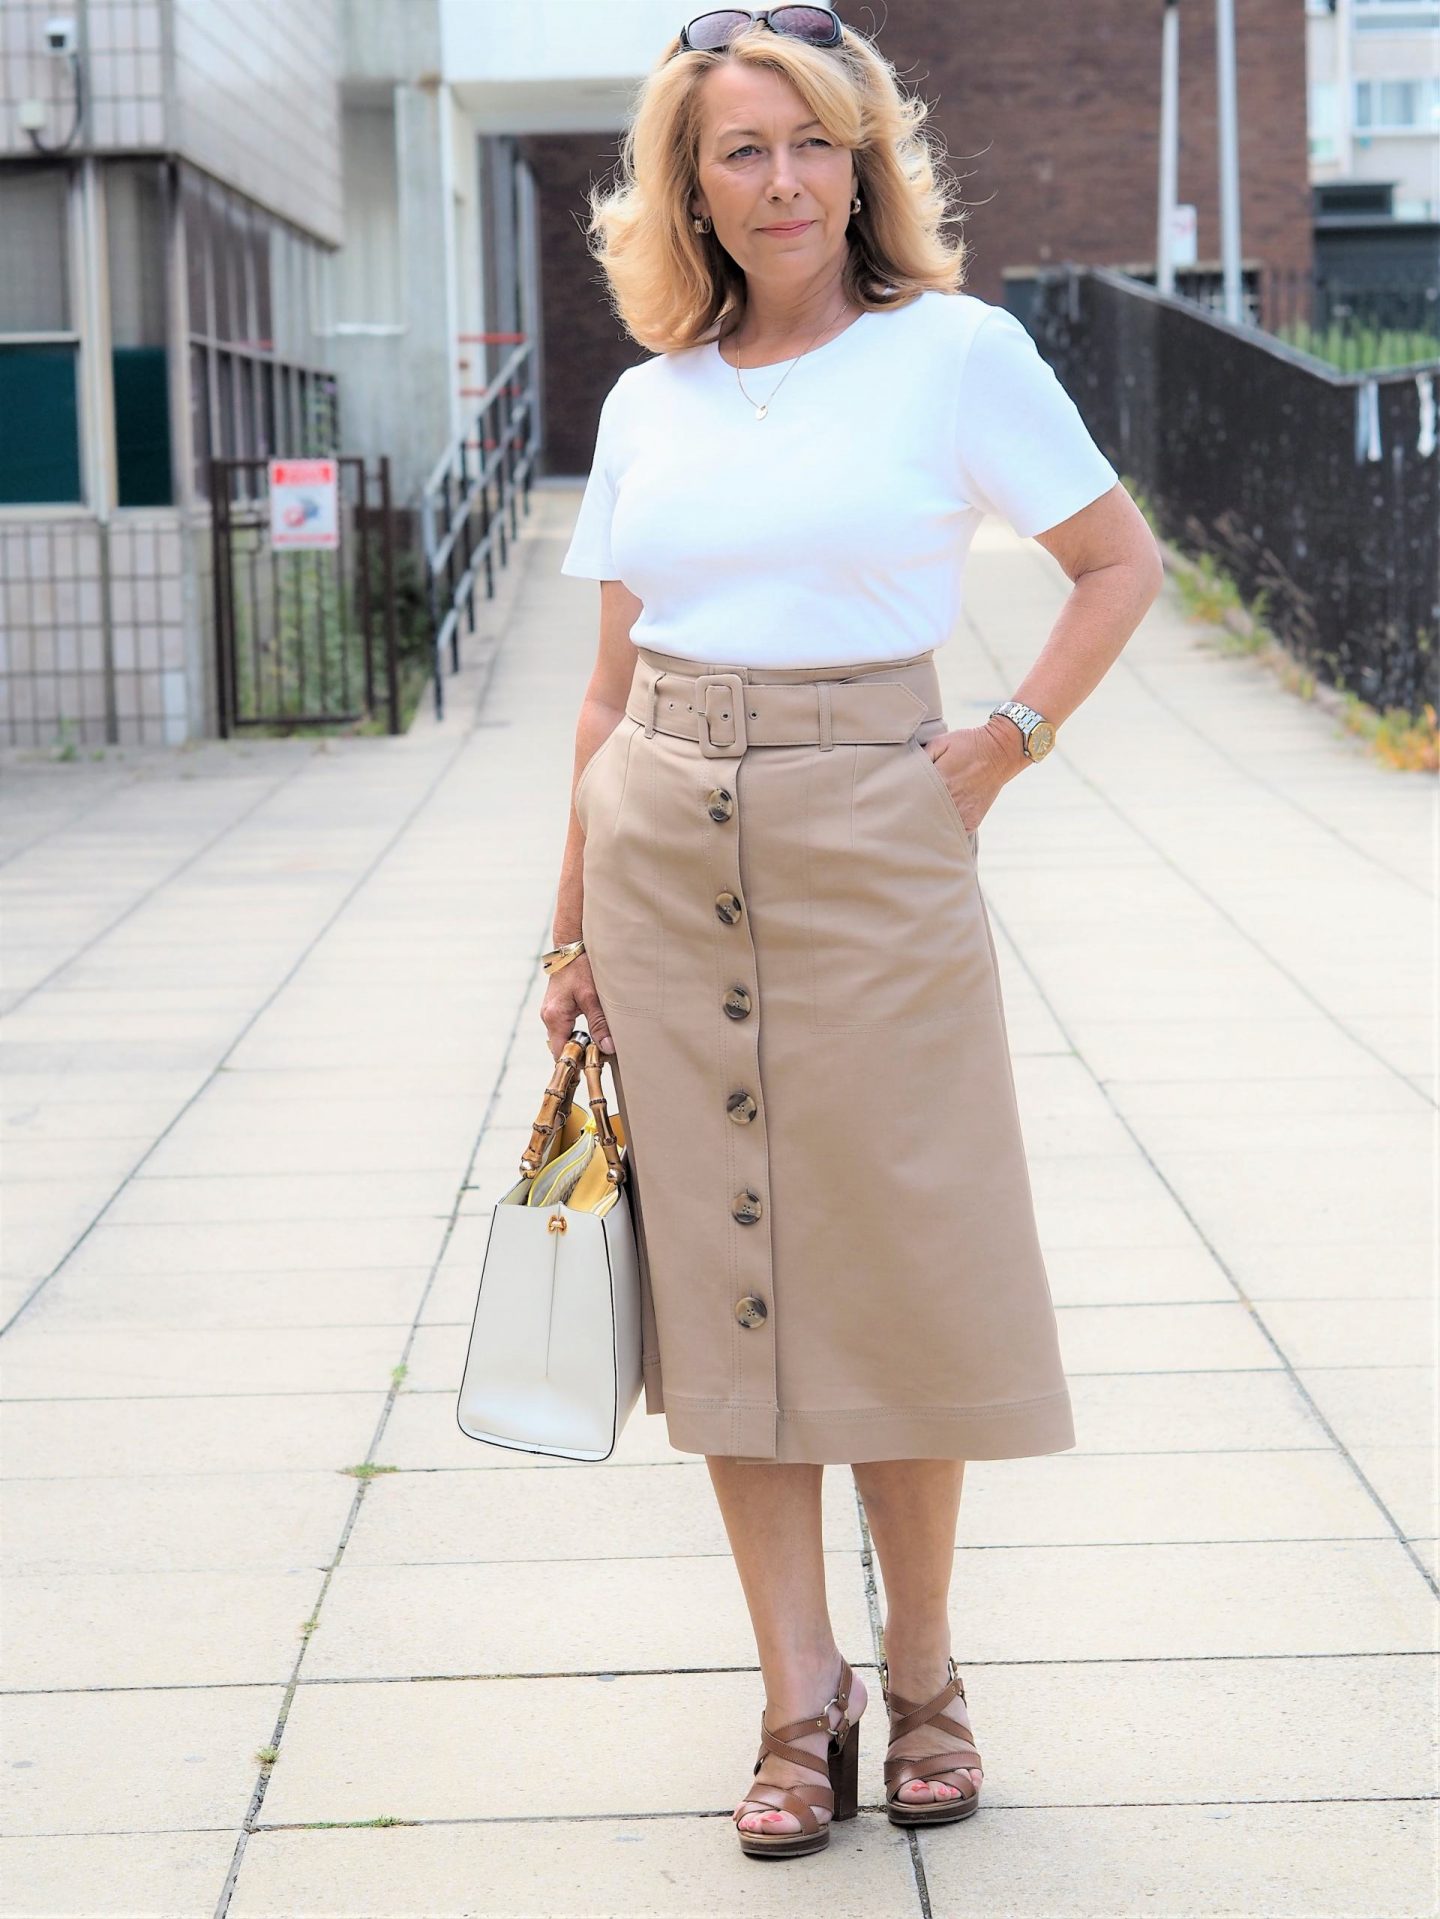 safari-style skirt that will work perfectly with my neutral wardrobe